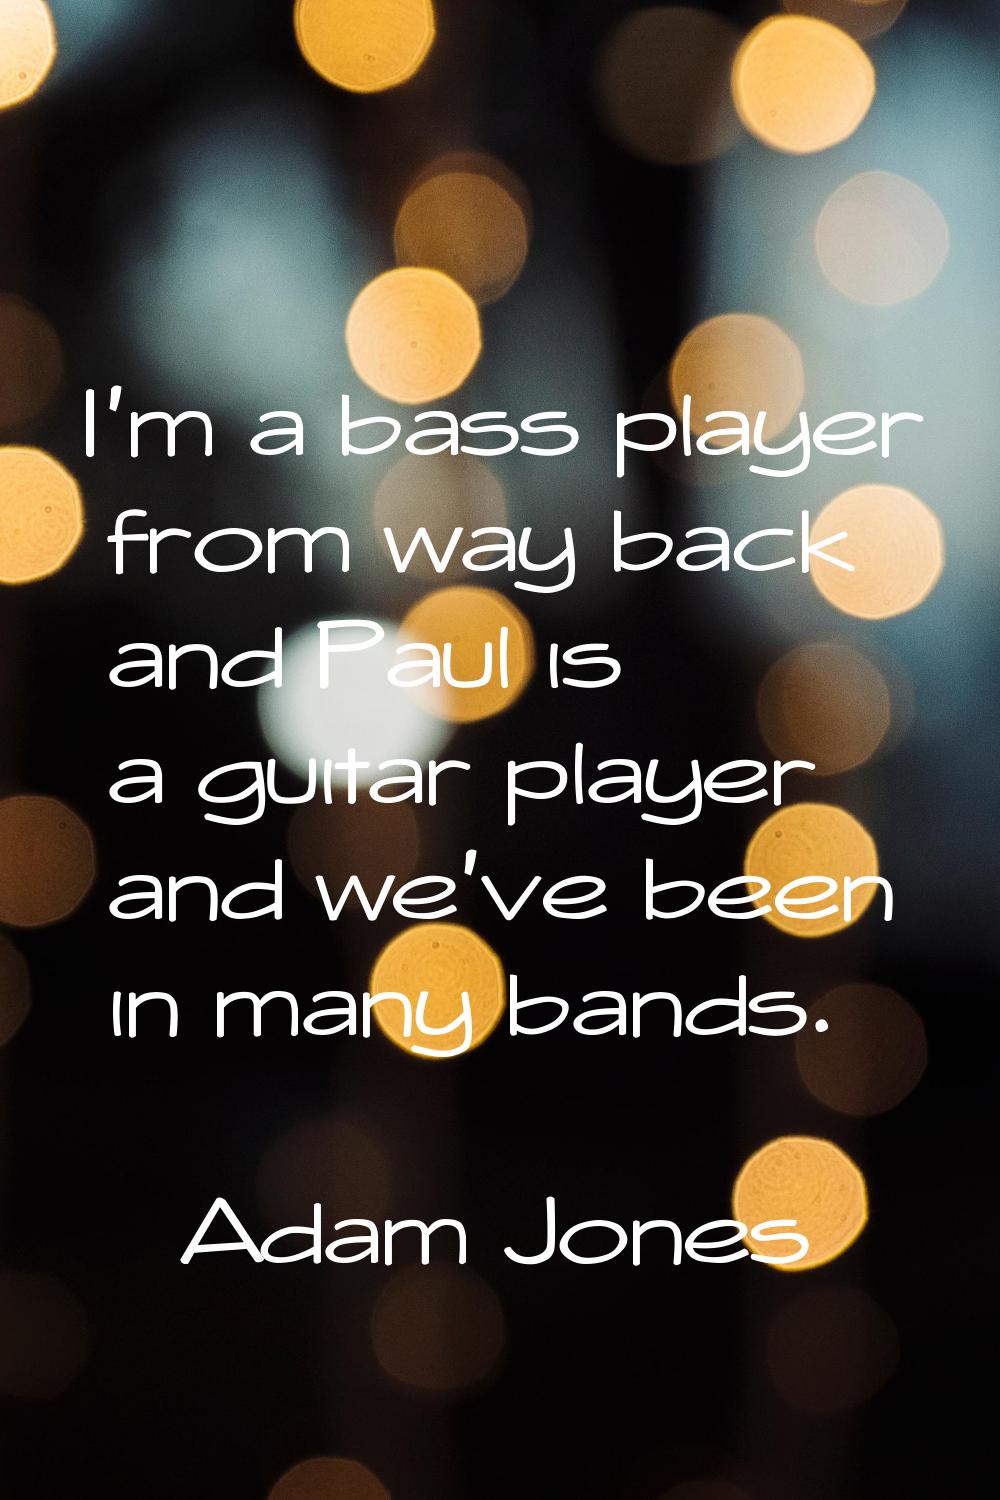 I'm a bass player from way back and Paul is a guitar player and we've been in many bands.